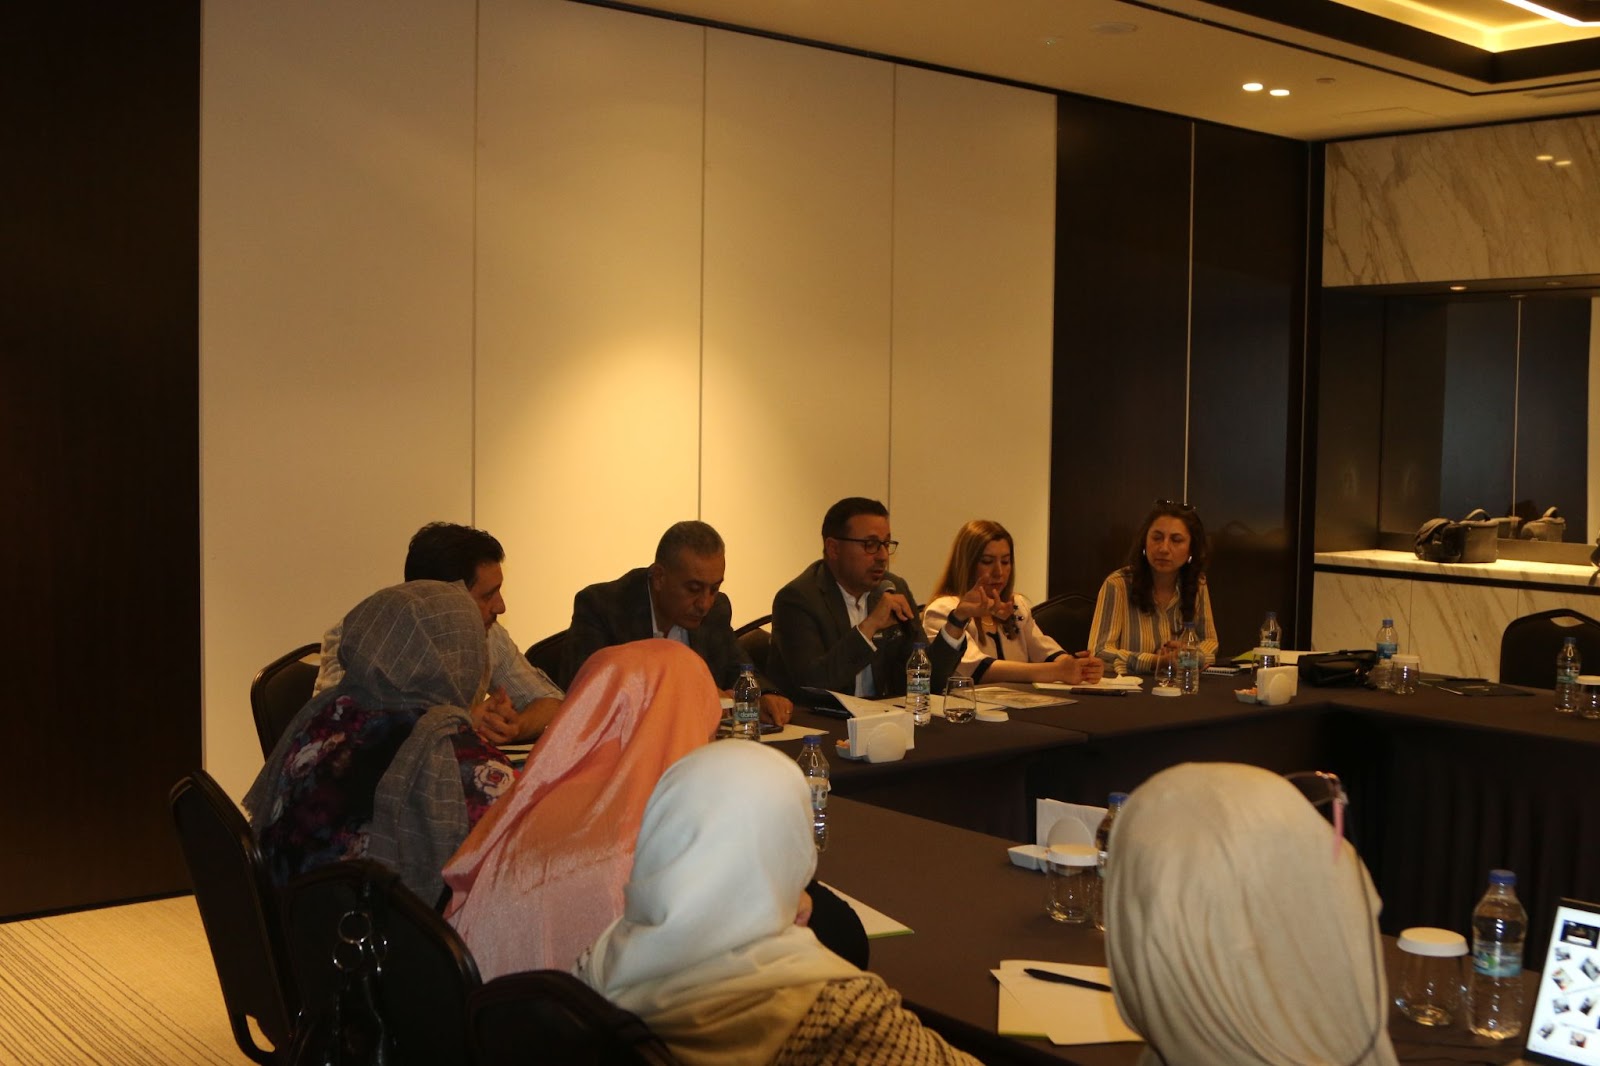 Syrian Women’s Authority Workshop Kicks Off Aiming to Engage Women More in Politics